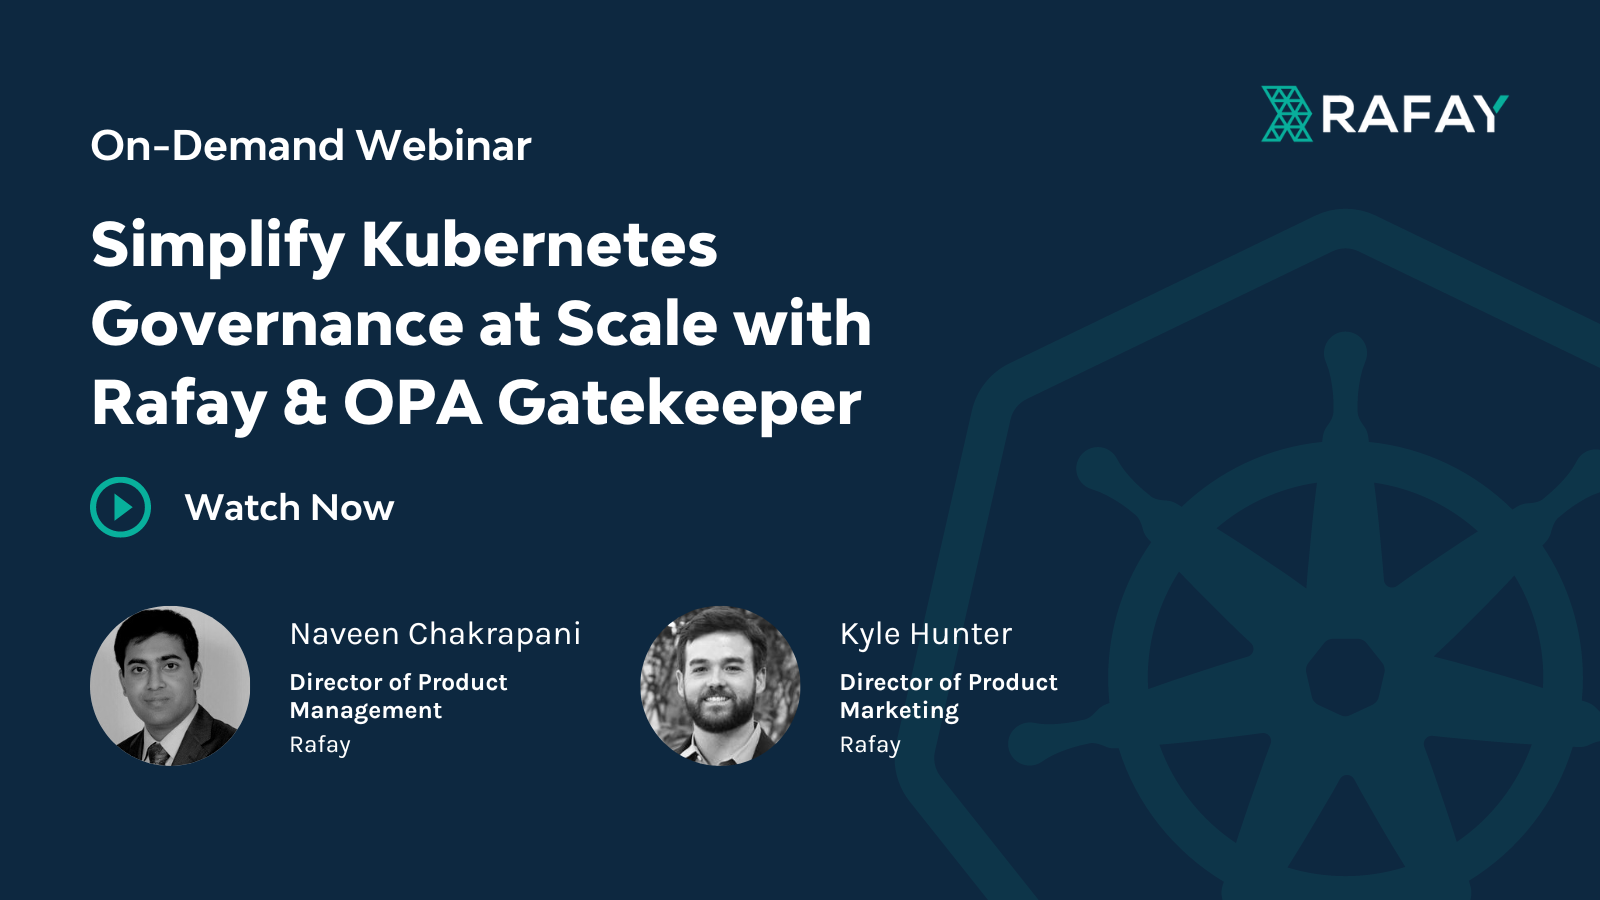 image for Simplify Kubernetes Governance at Scale with Rafay & OPA Gatekeeper